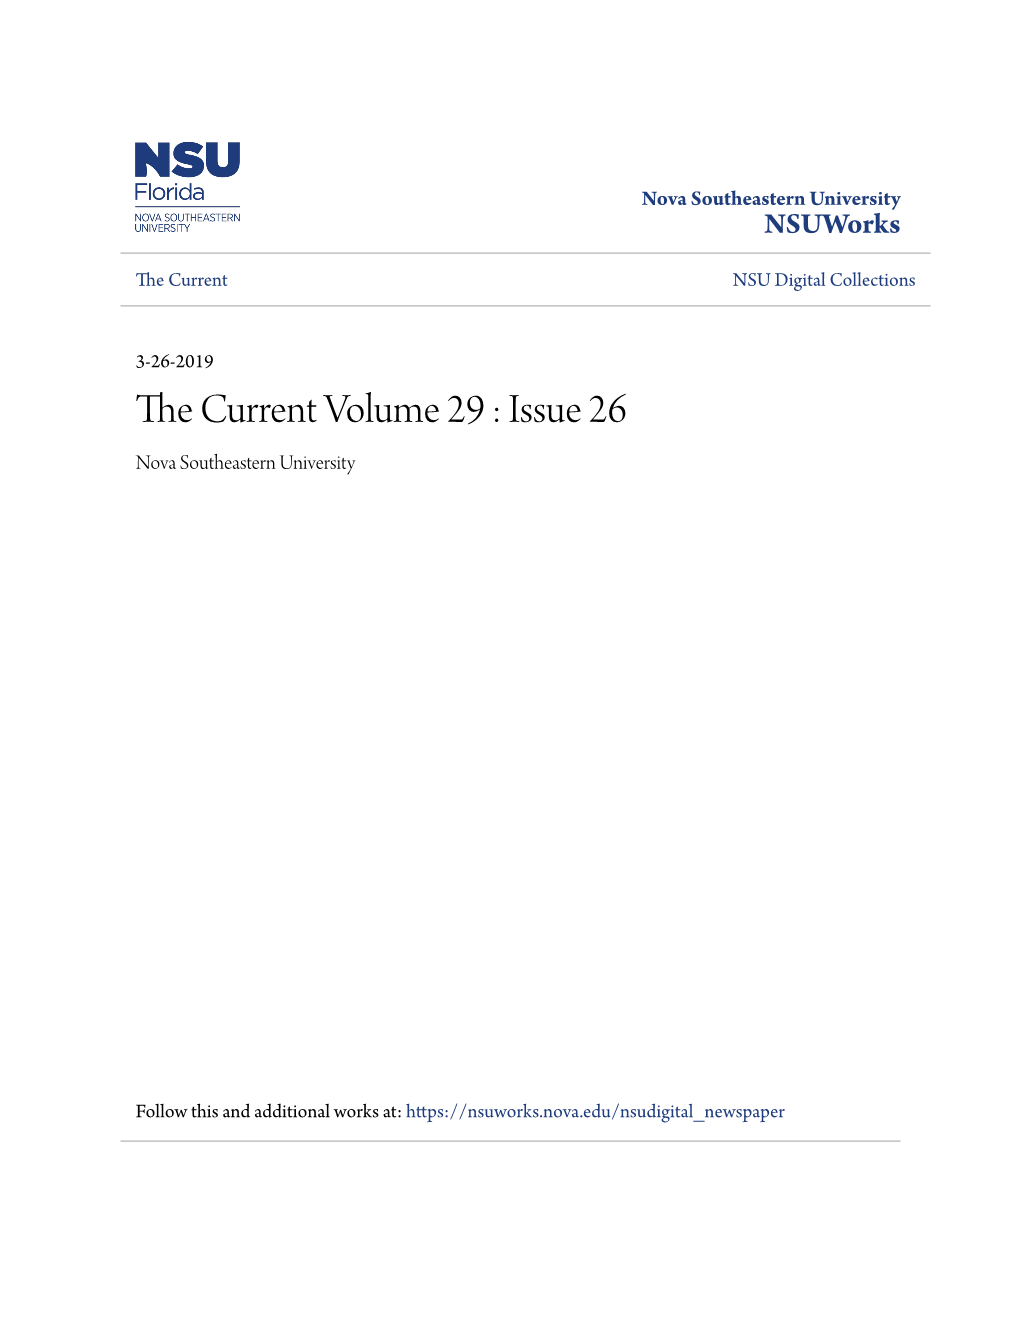 The Current Volume 29 : Issue 26